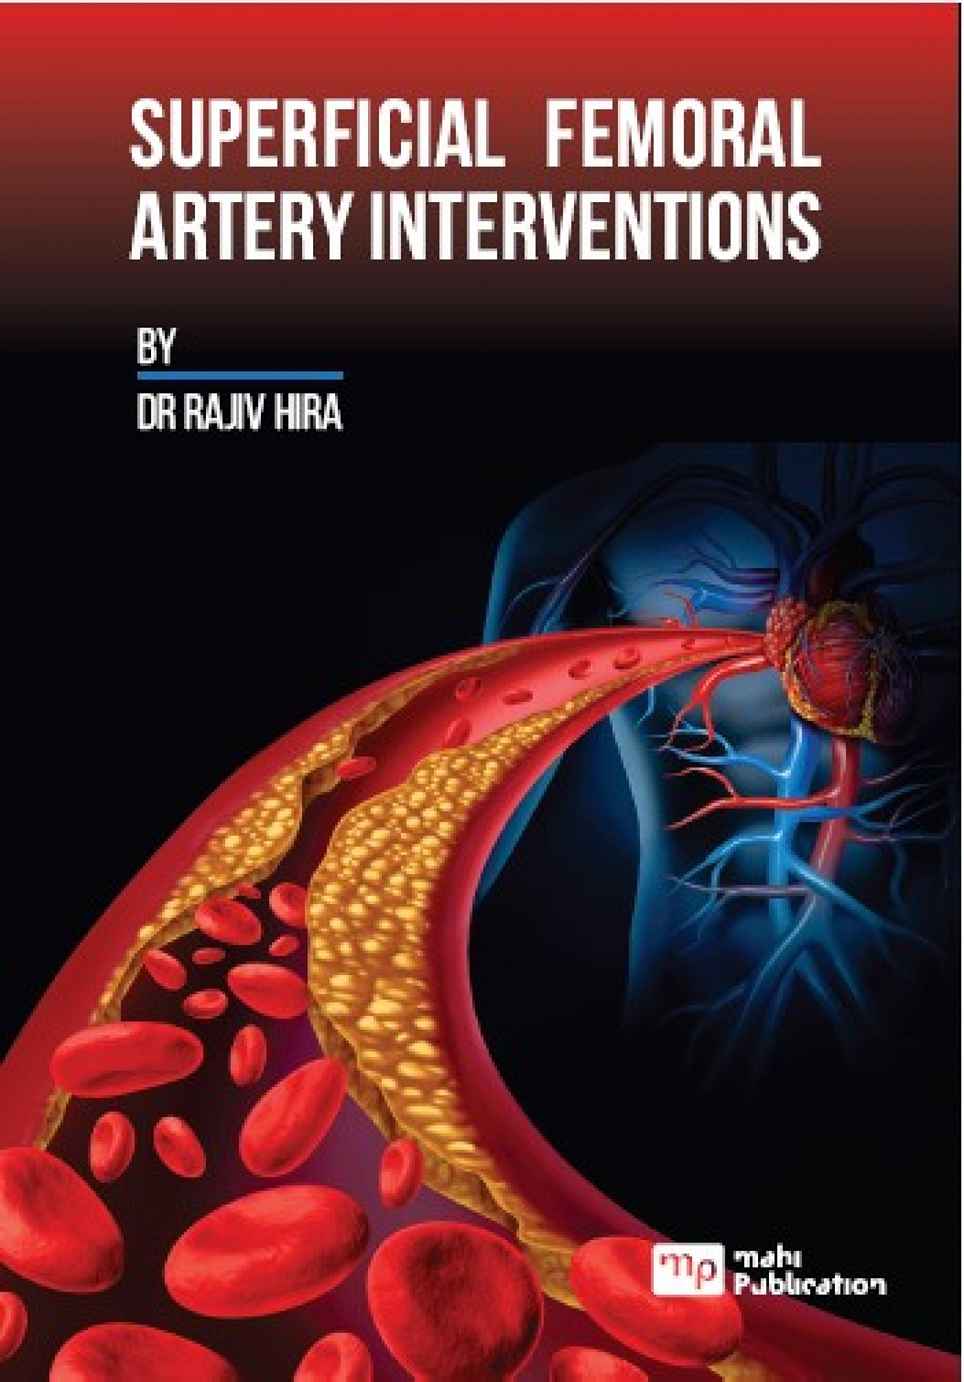 Superficial Femoral Artery Interventions